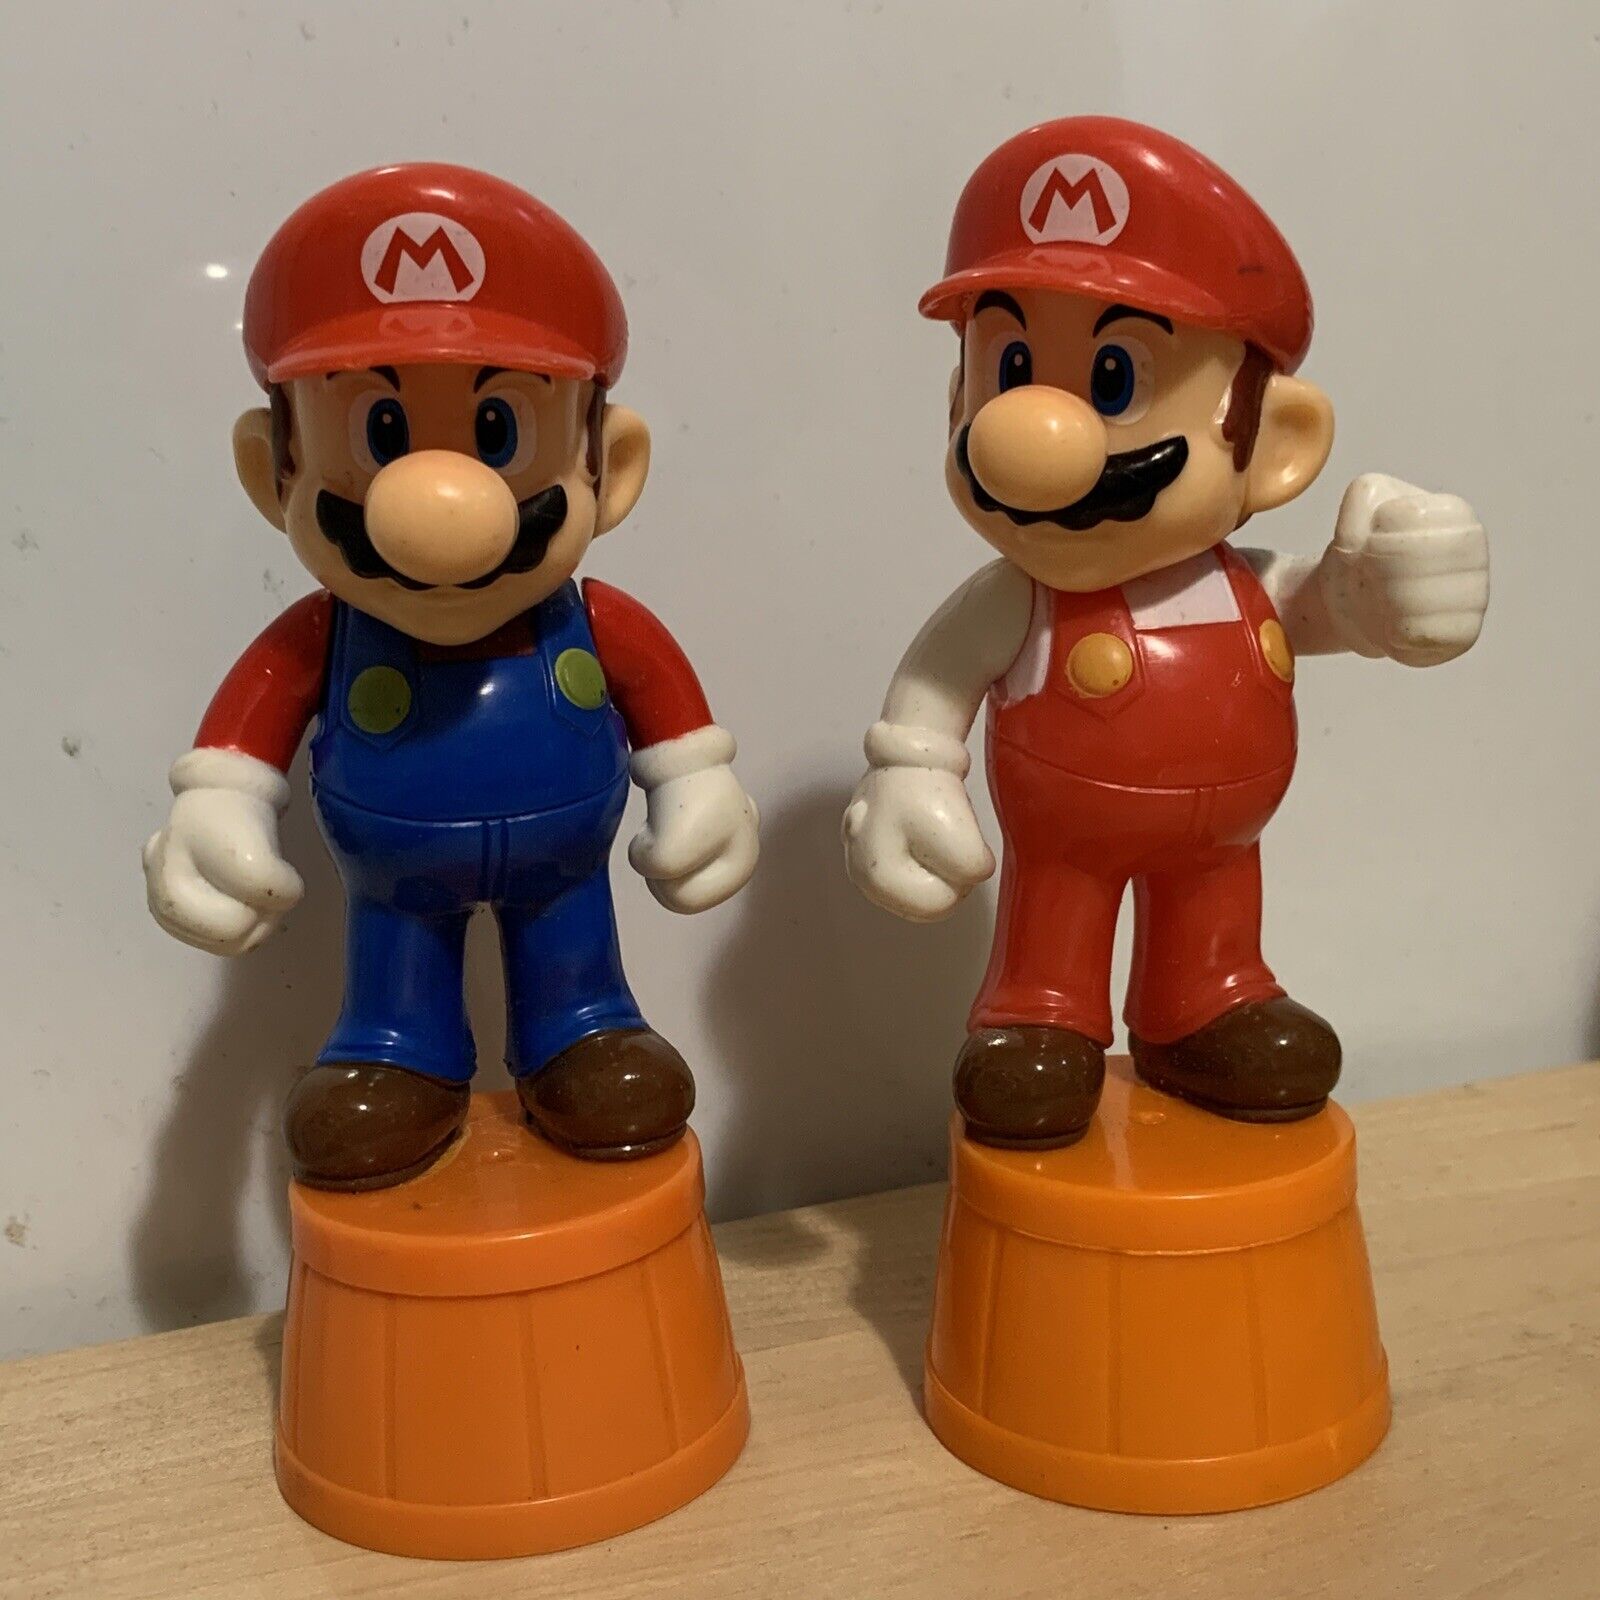 Au'some Super Mario Bros Figure Top Of Barrel Candy Container 4.5” Lot Of 2